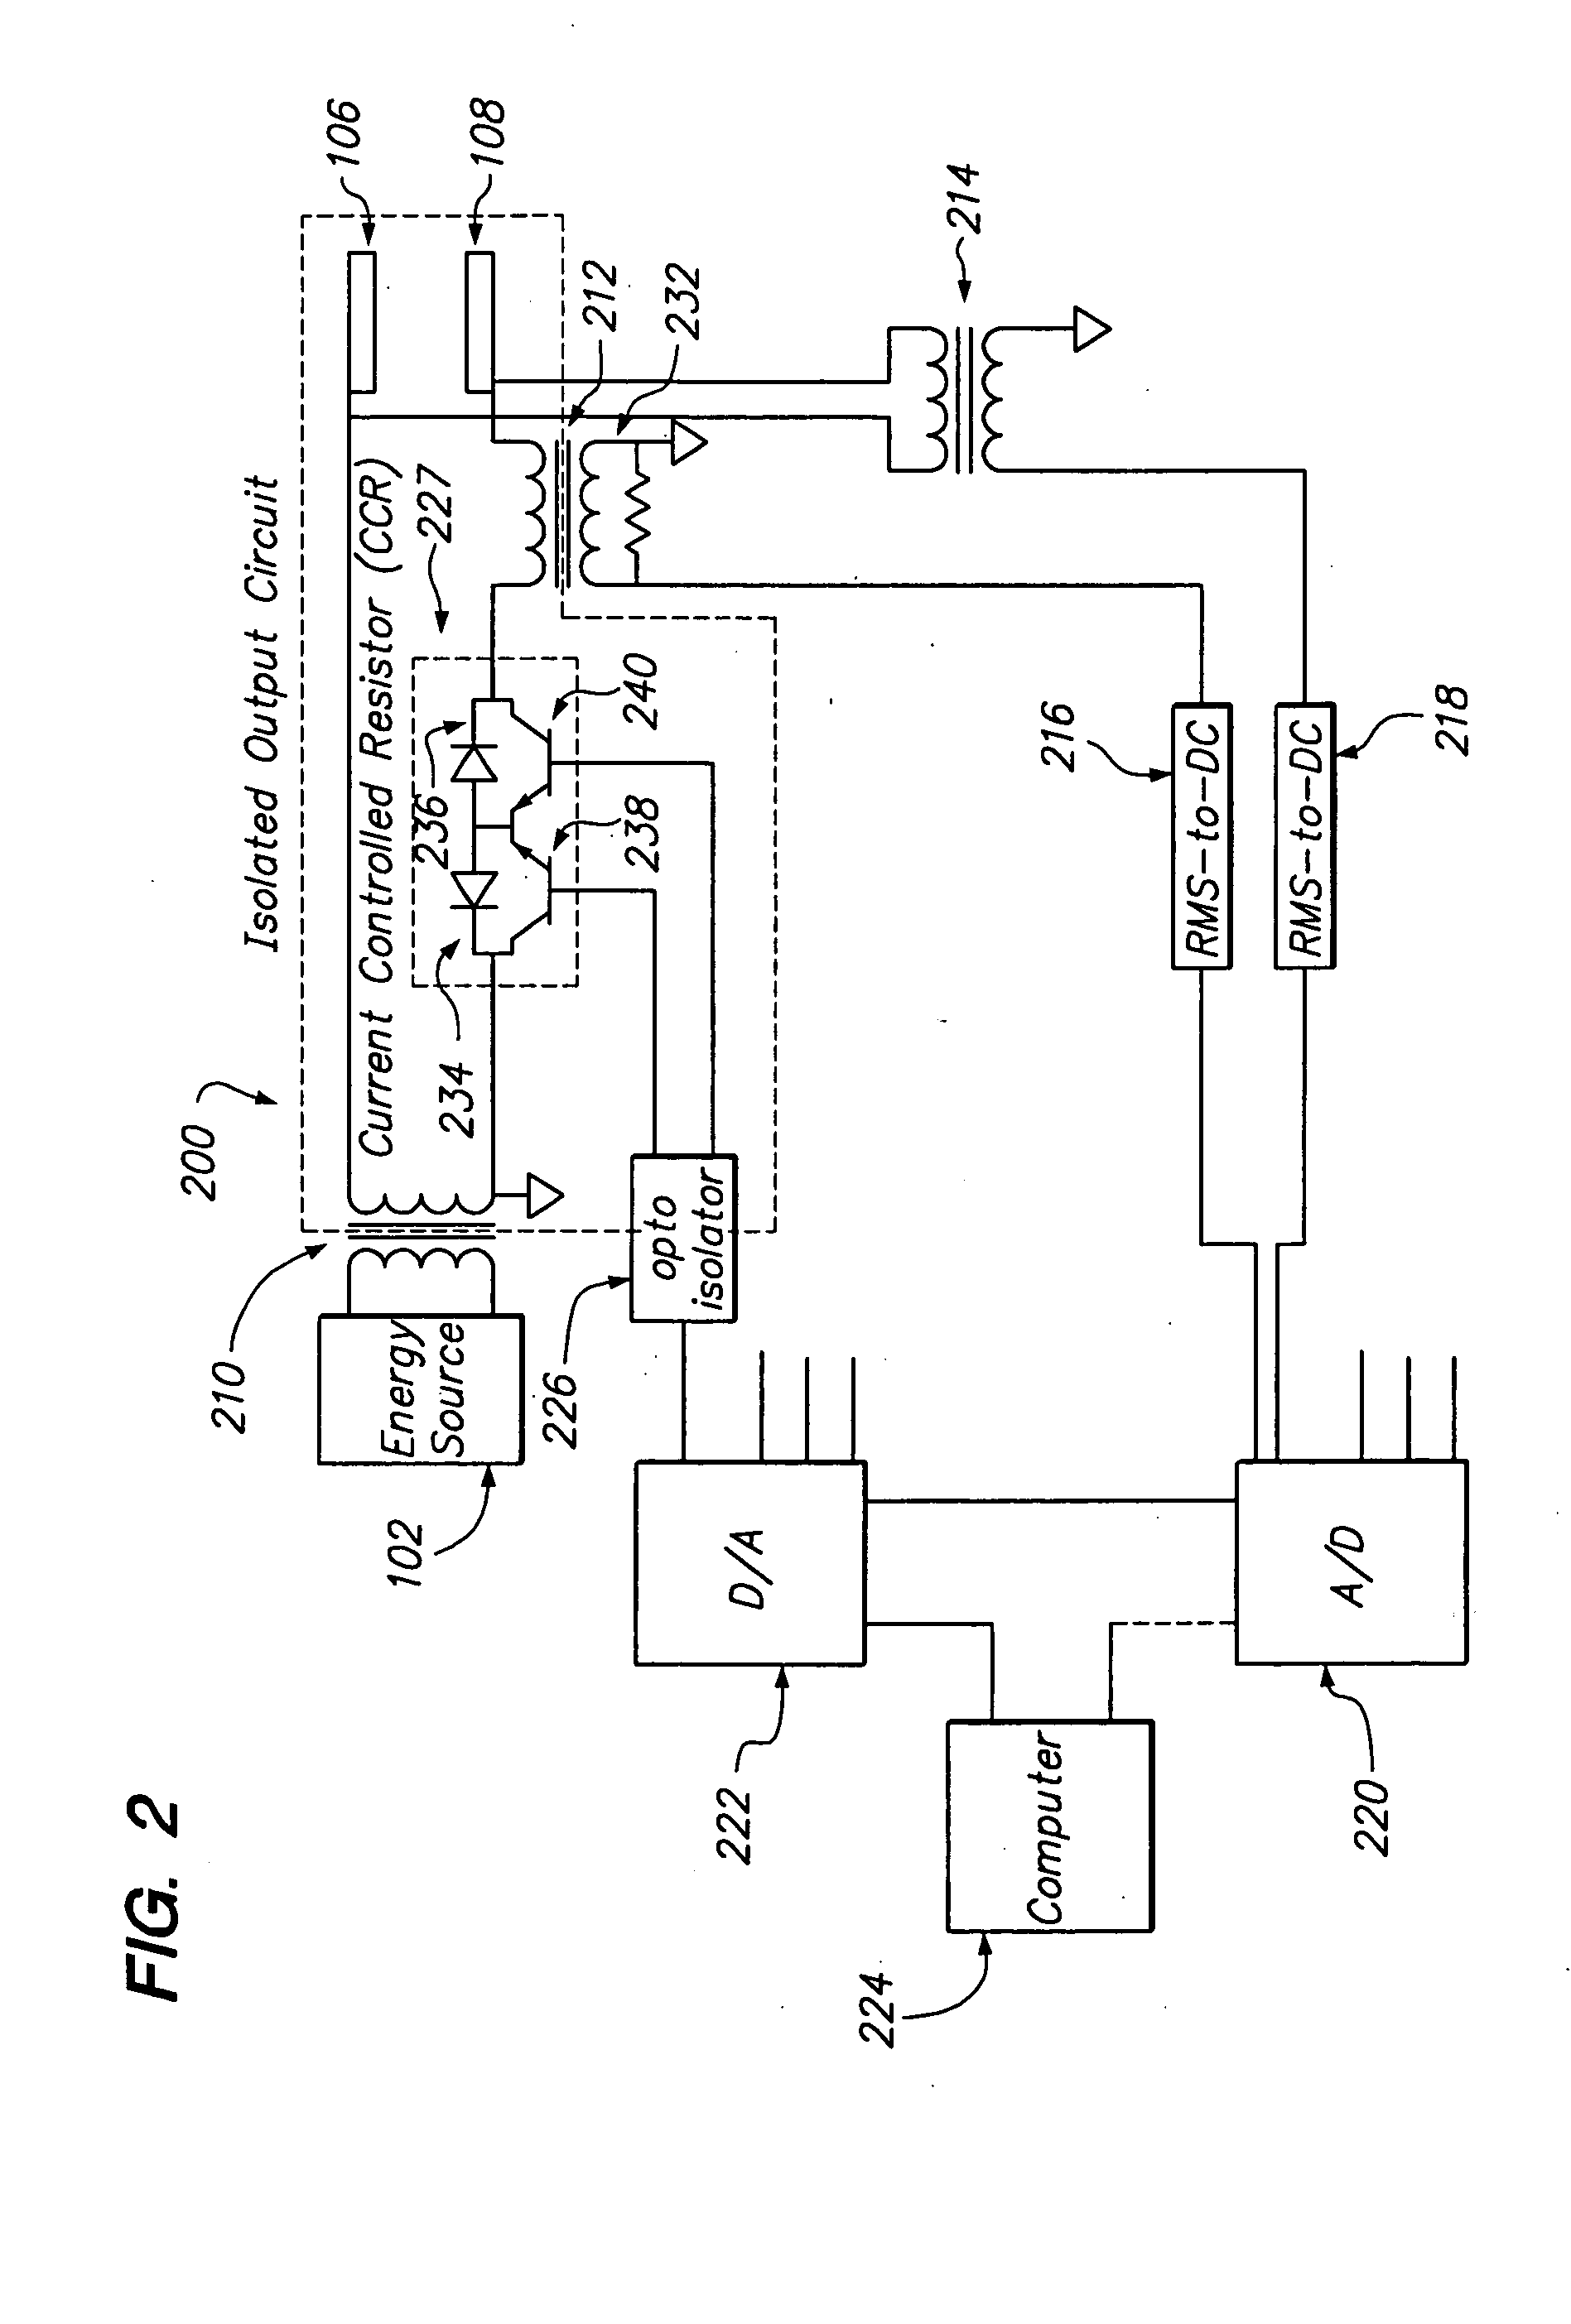 Methods and apparatus for dispersing current flow in electrosurgery